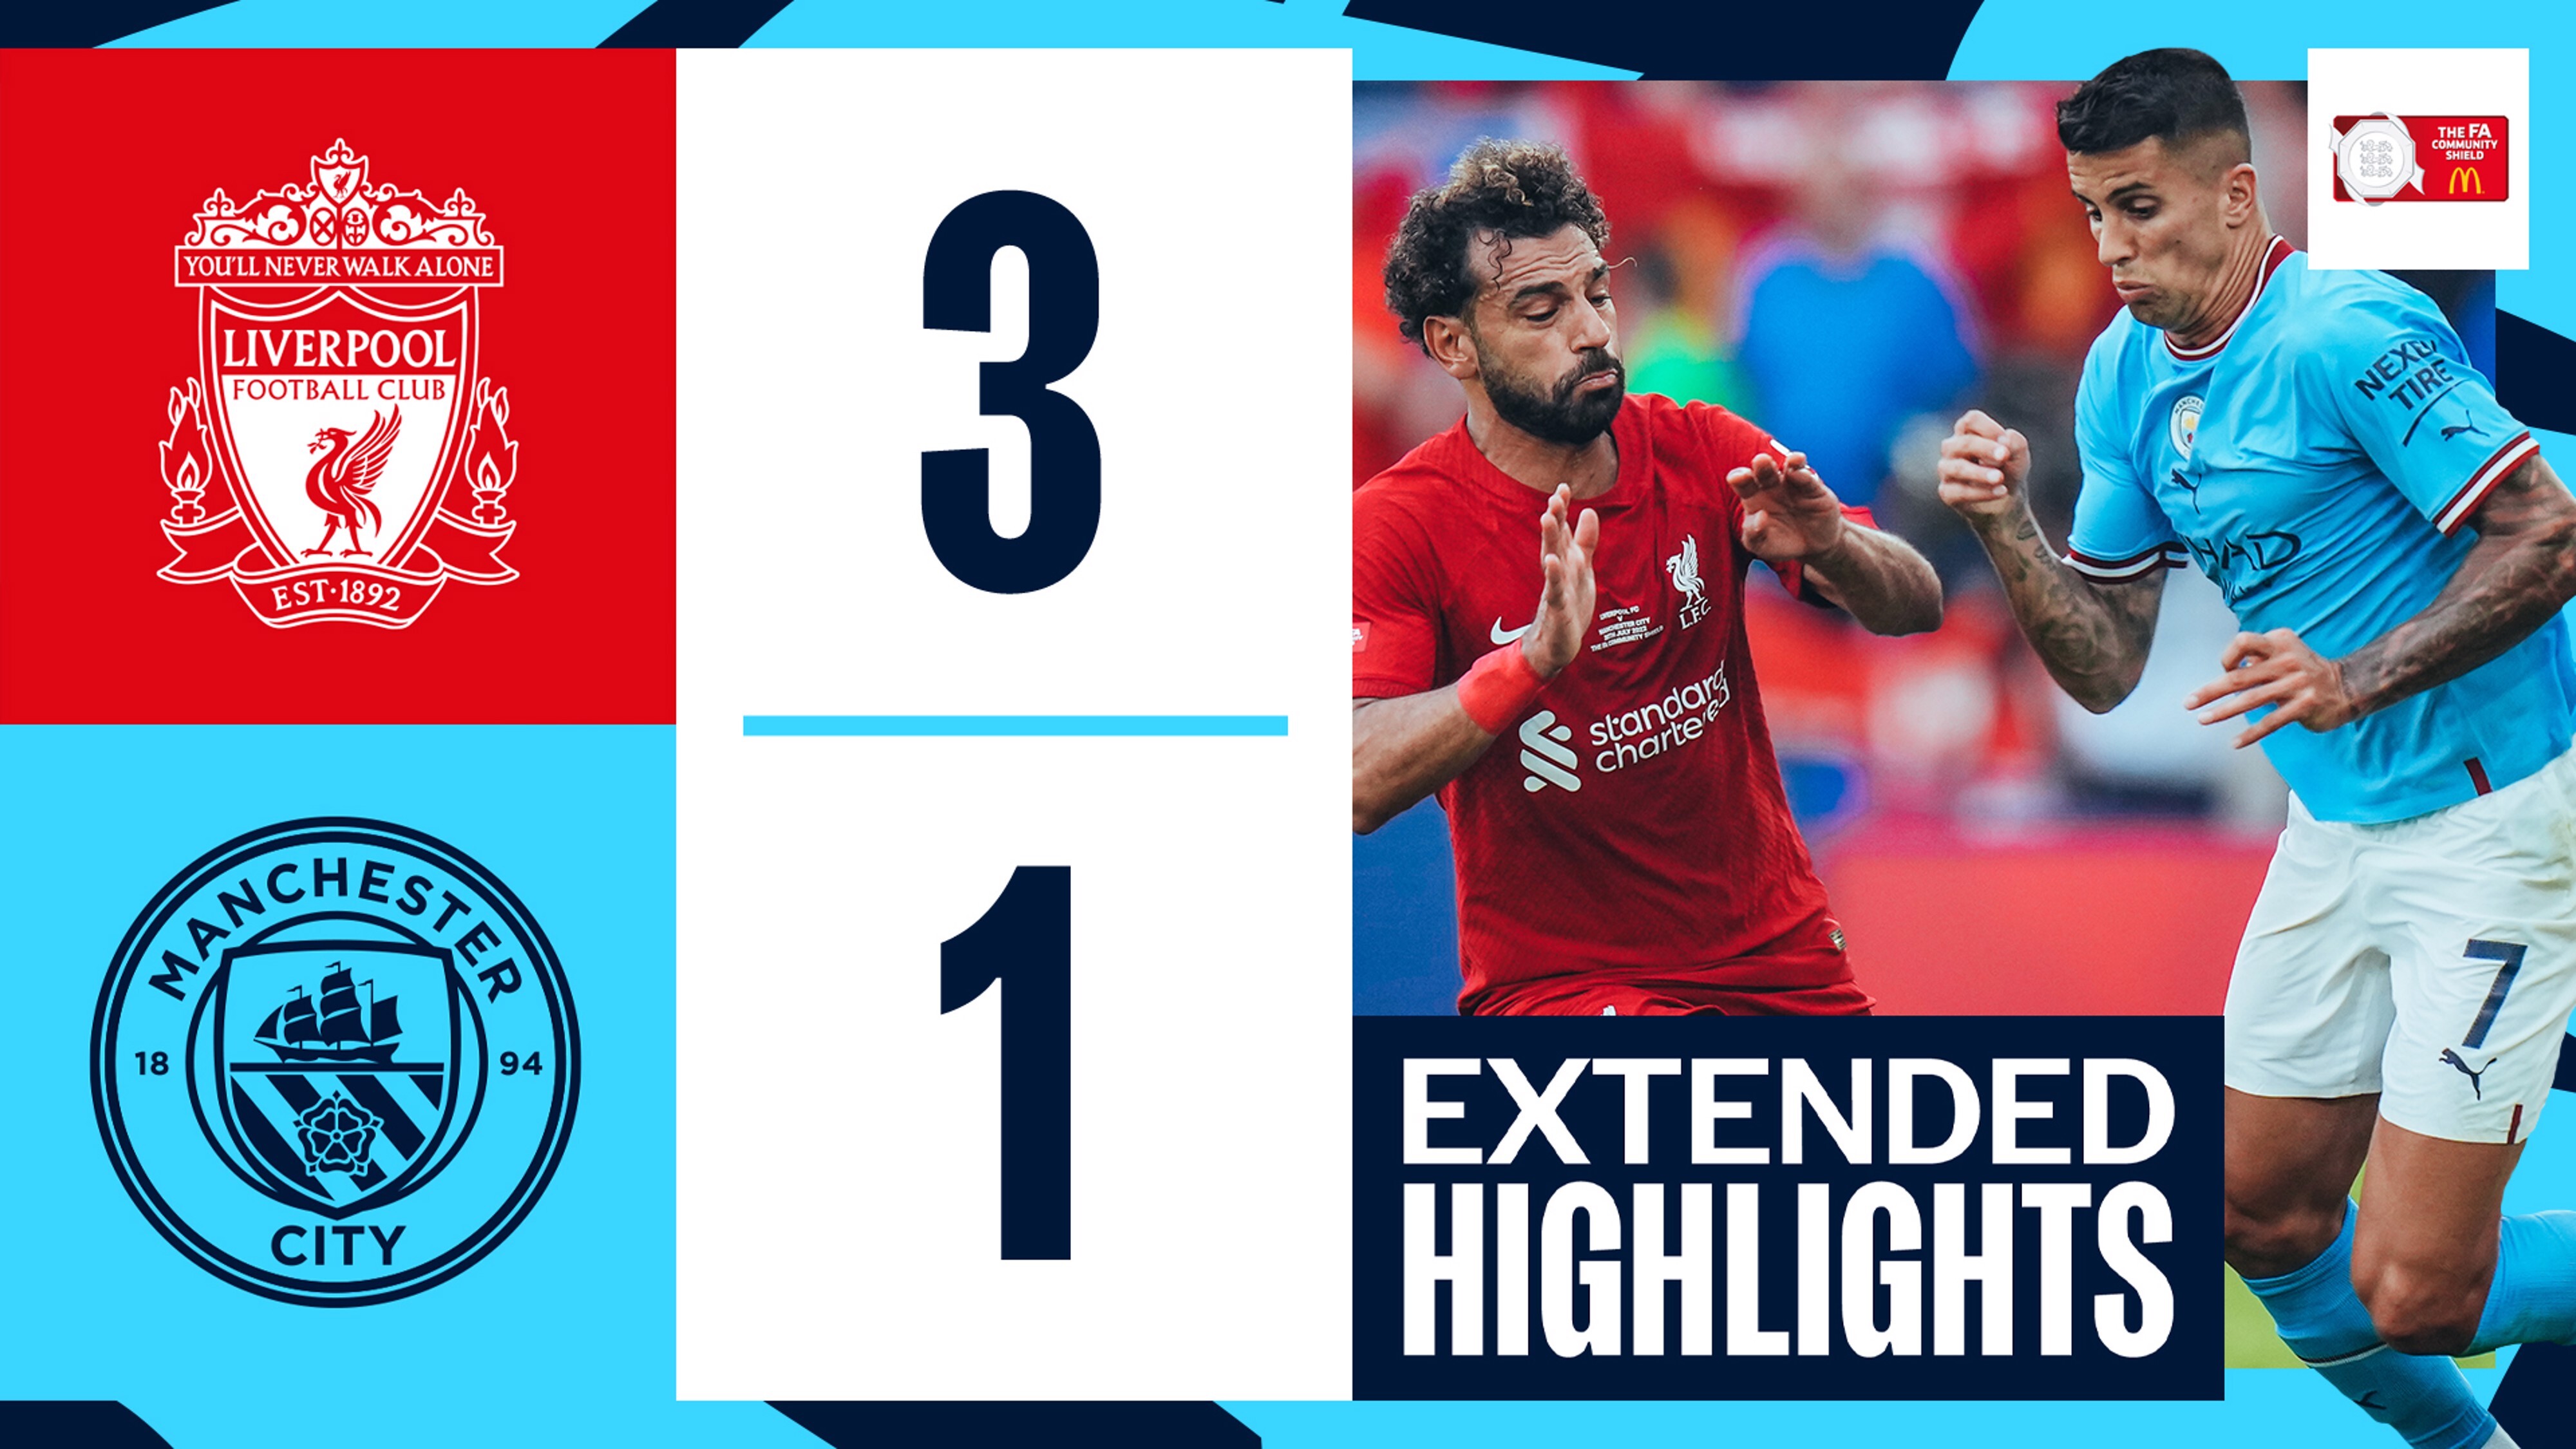 Extended highlights Liverpool 3-1 City